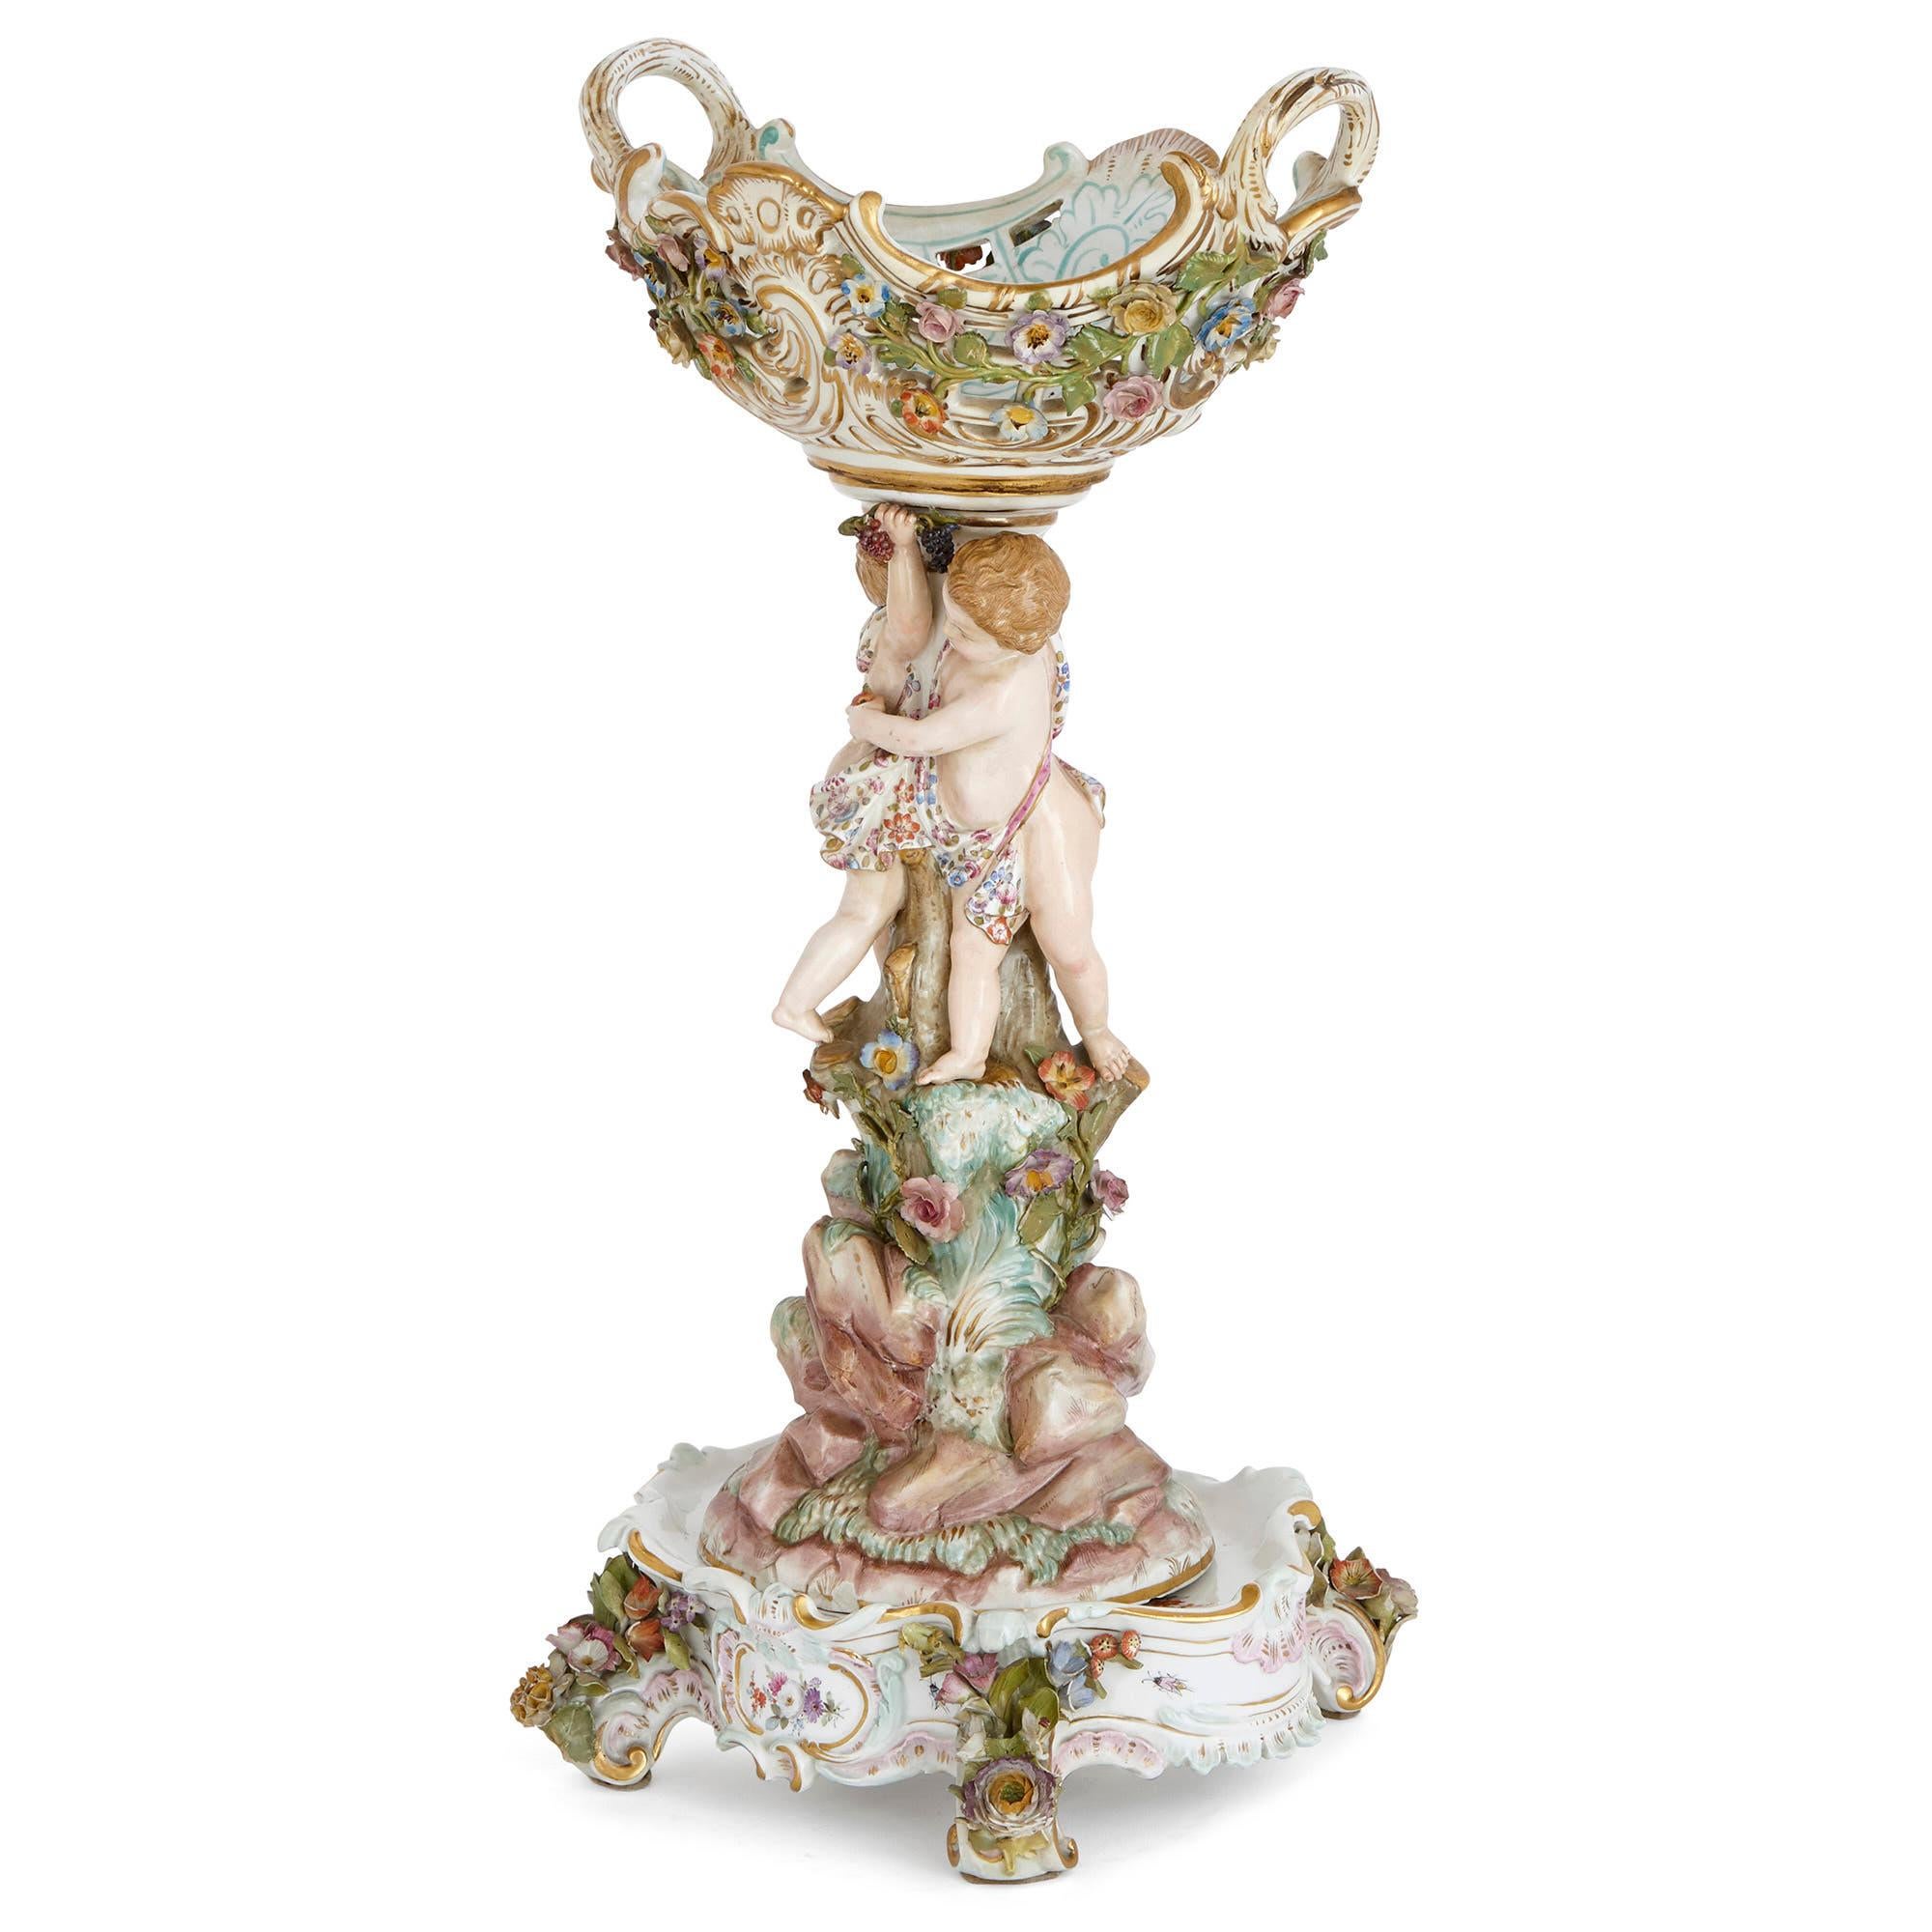 This delightful centrepiece was crafted by the Meissen Porcelain Manufactory. Established in Germany in the early 18th century, Meissen was the first factory to produce true porcelain wares in Europe. The company specialized in the production of